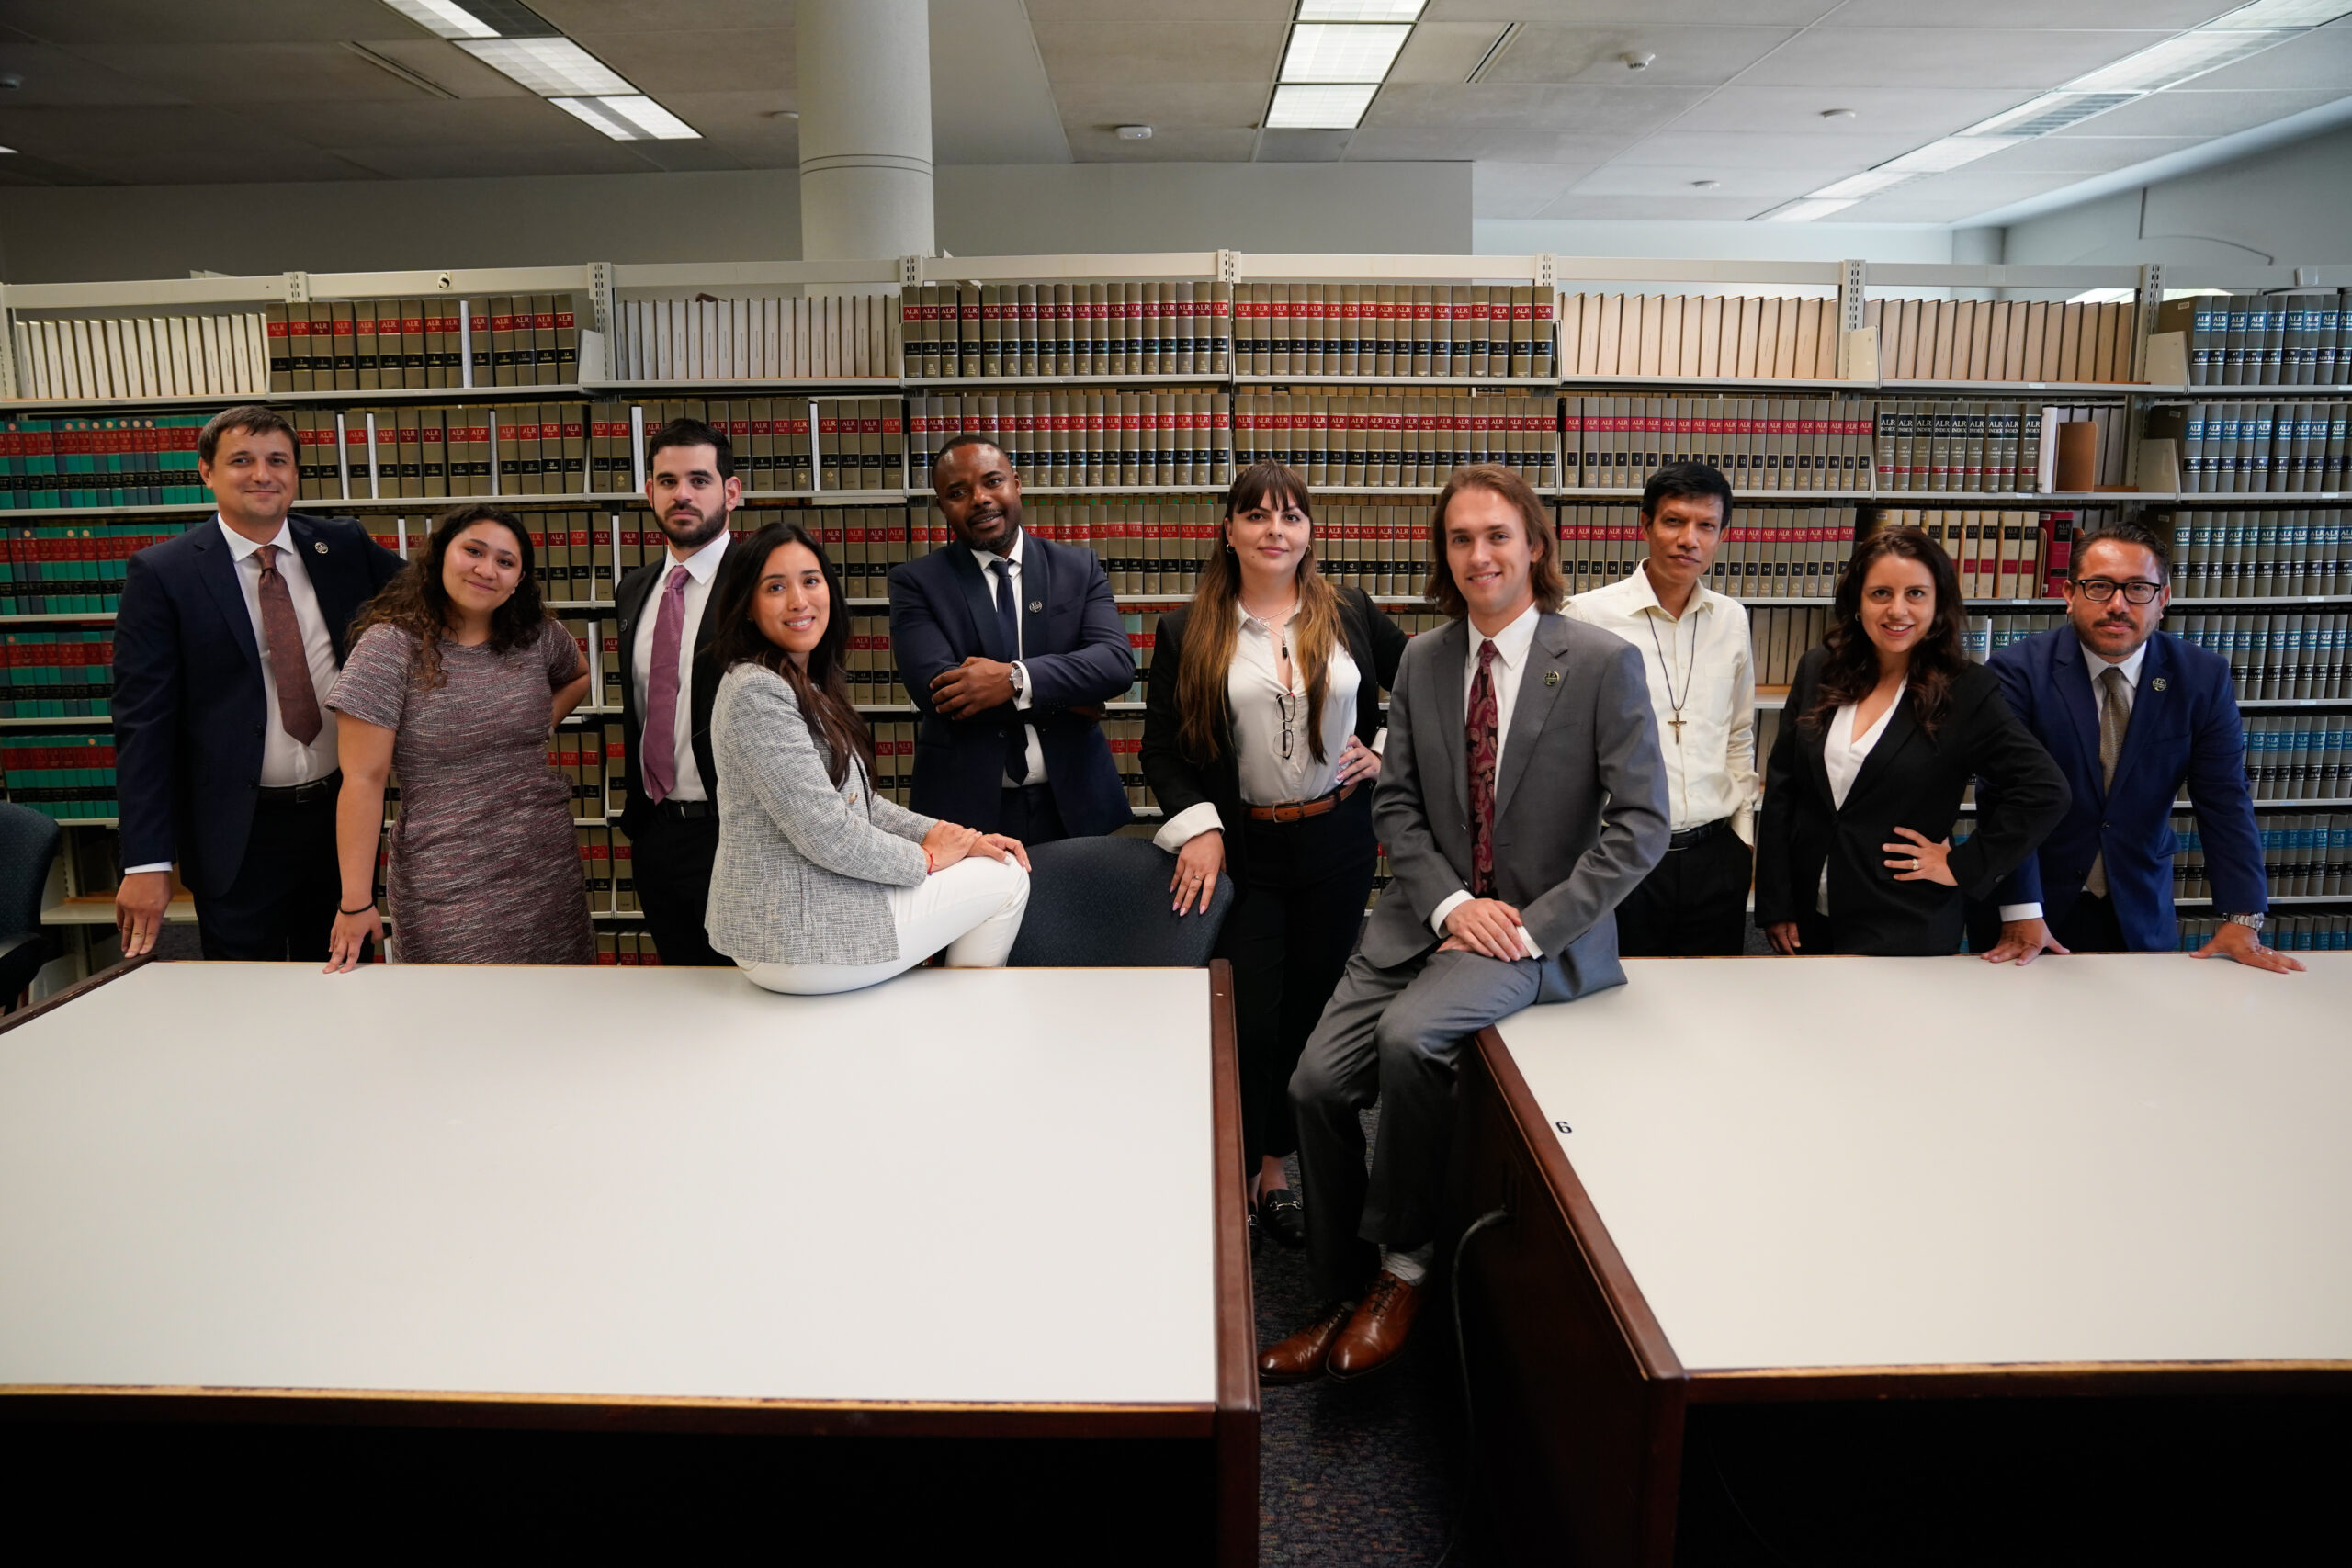 Image of several students in the law library.